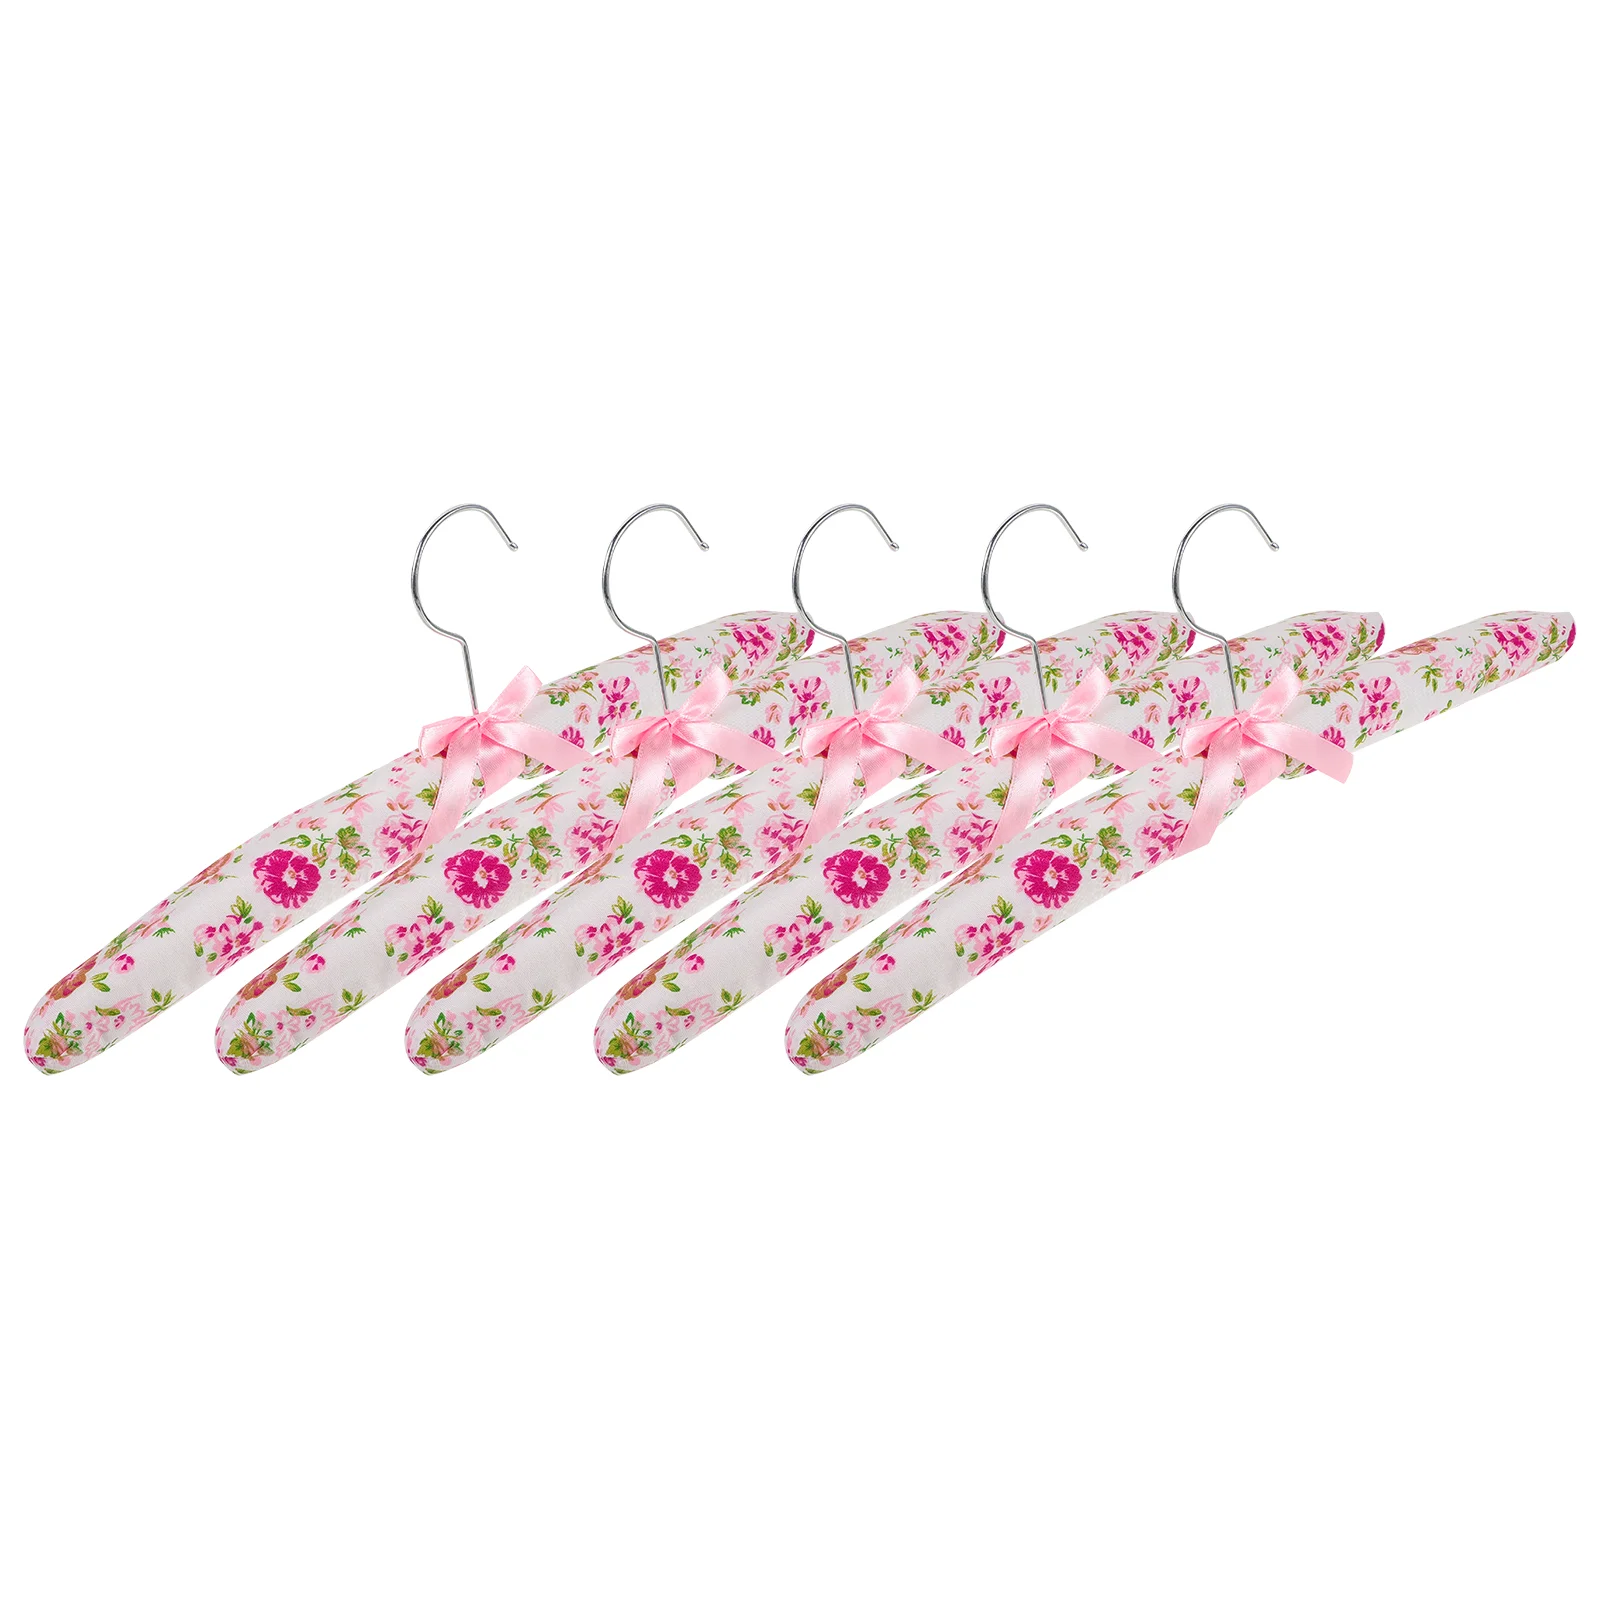 

5 Pcs Cloth Floral Hanger Home Supplies Hangers Skirts Clothing Storage Racks Sponge Clothes Pants Puffy Small Anti-skid